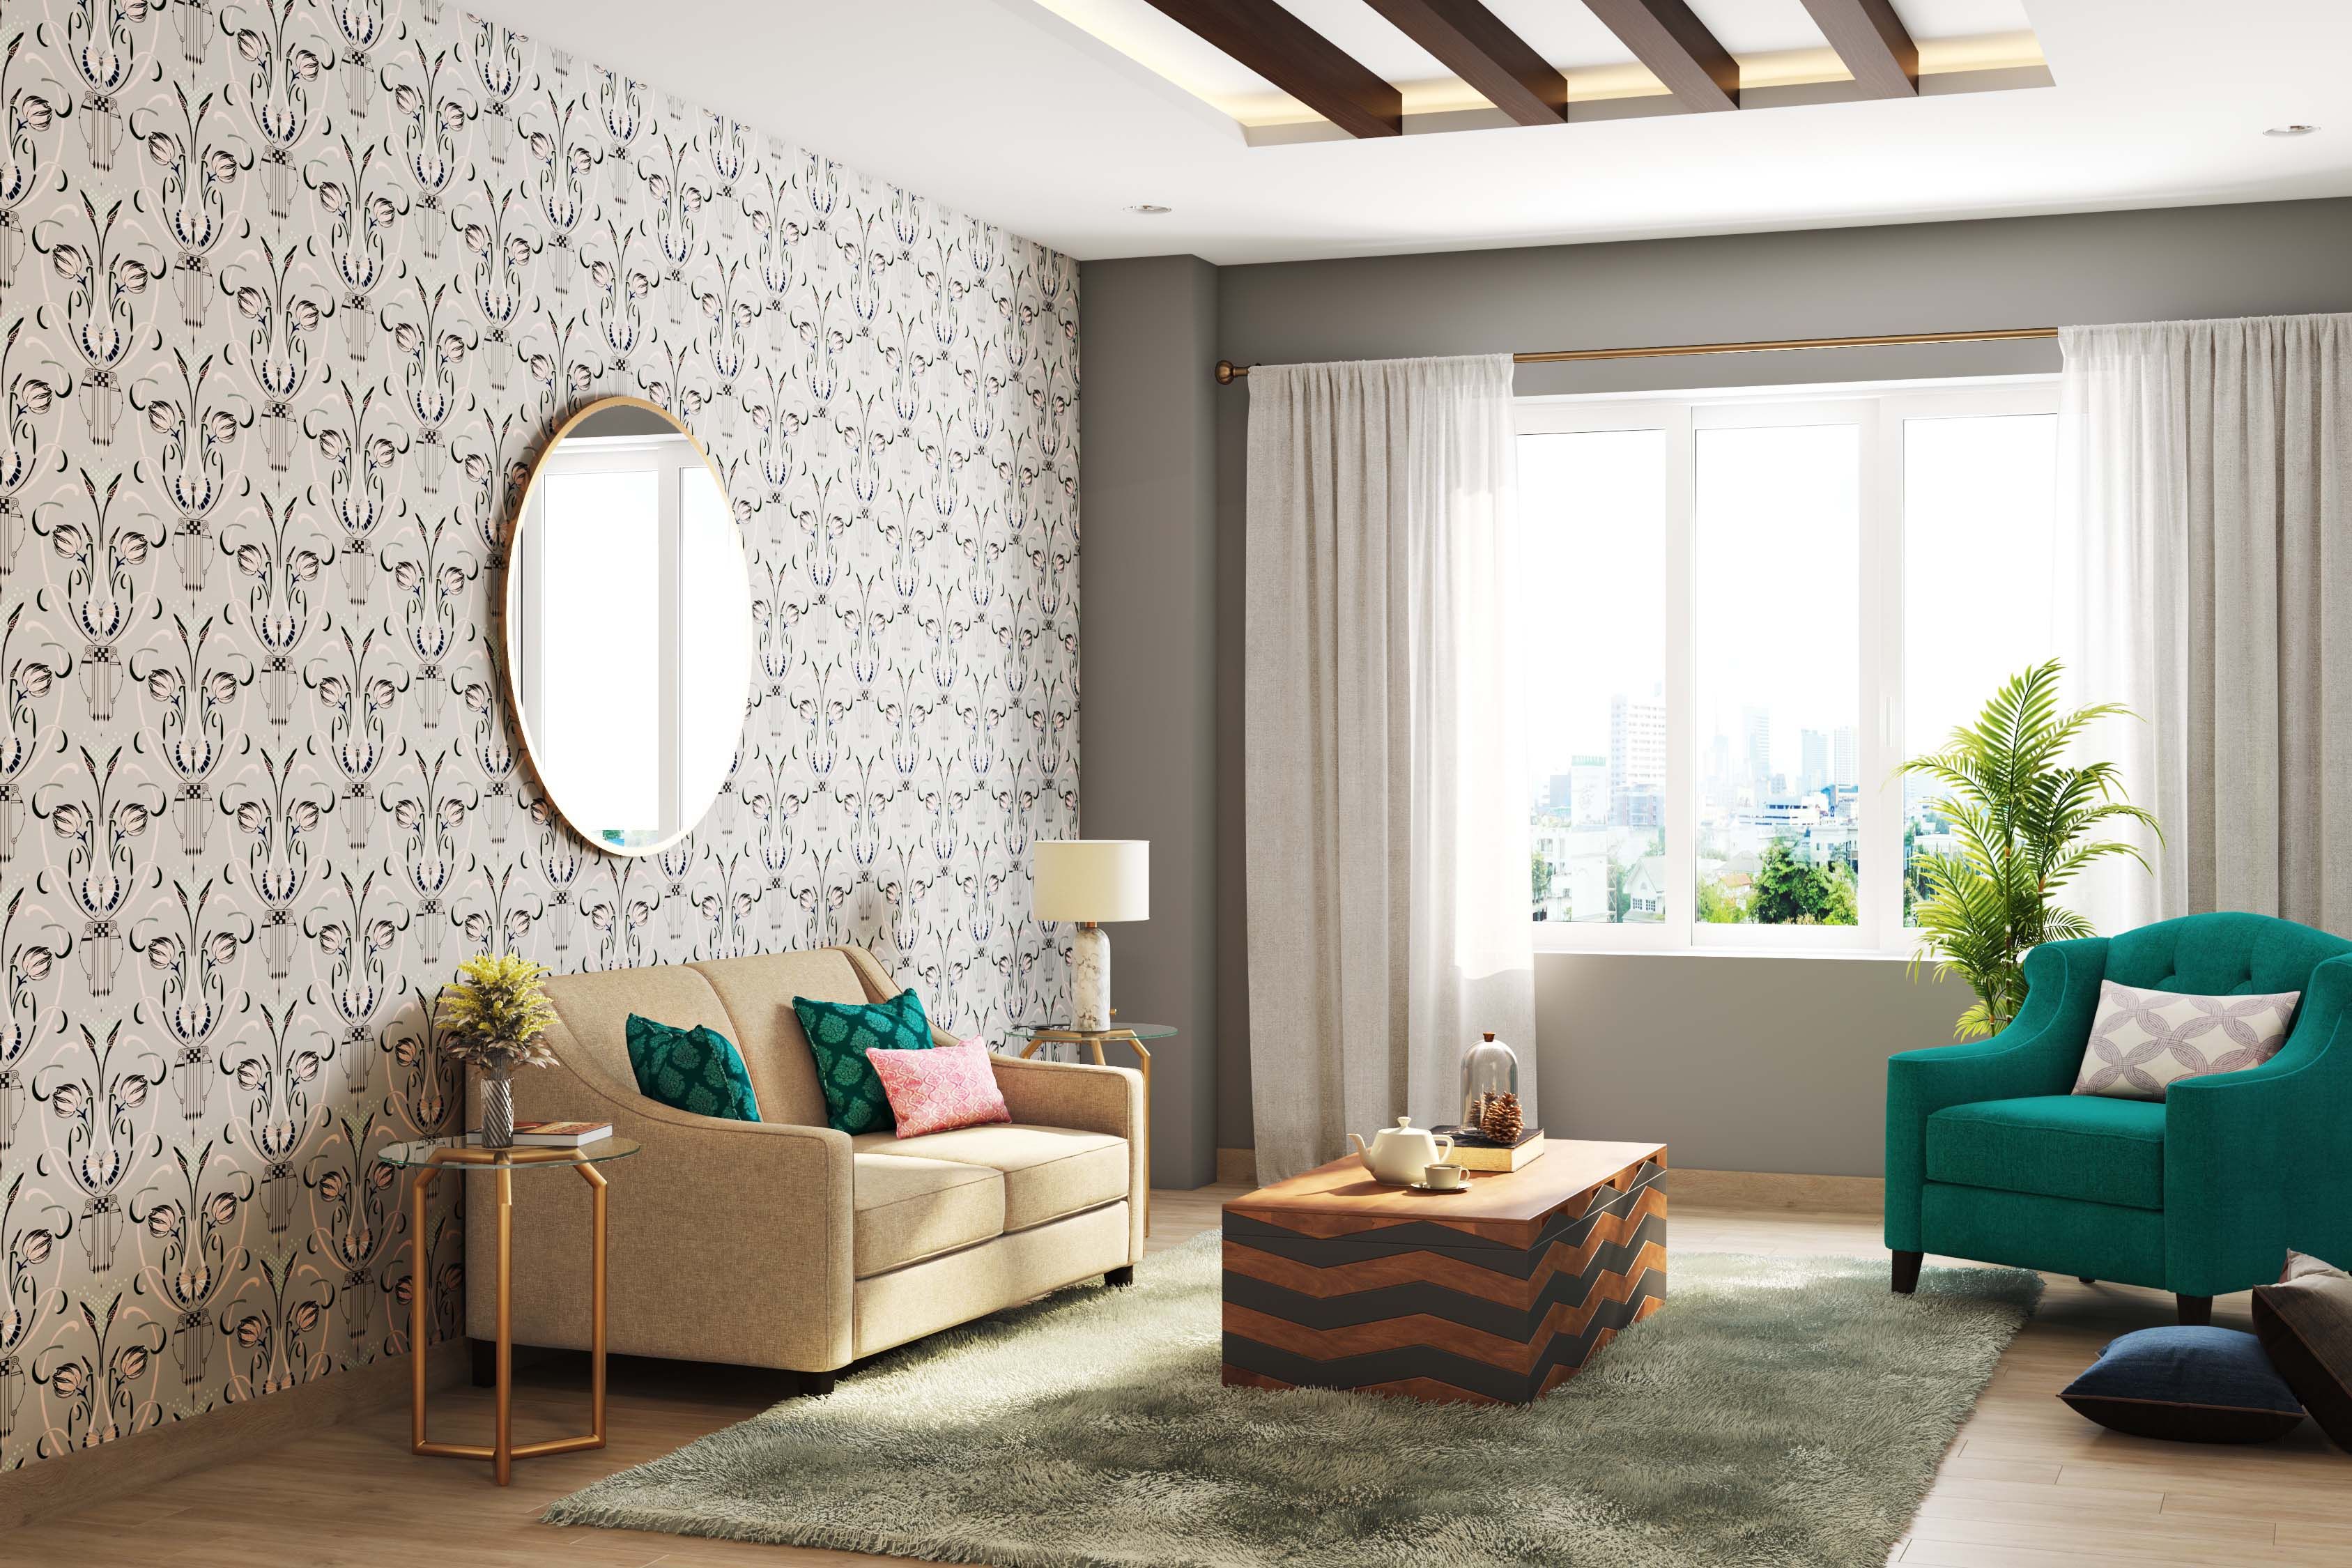 Classic Beige And White Patterned Living Room Wallpaper Design